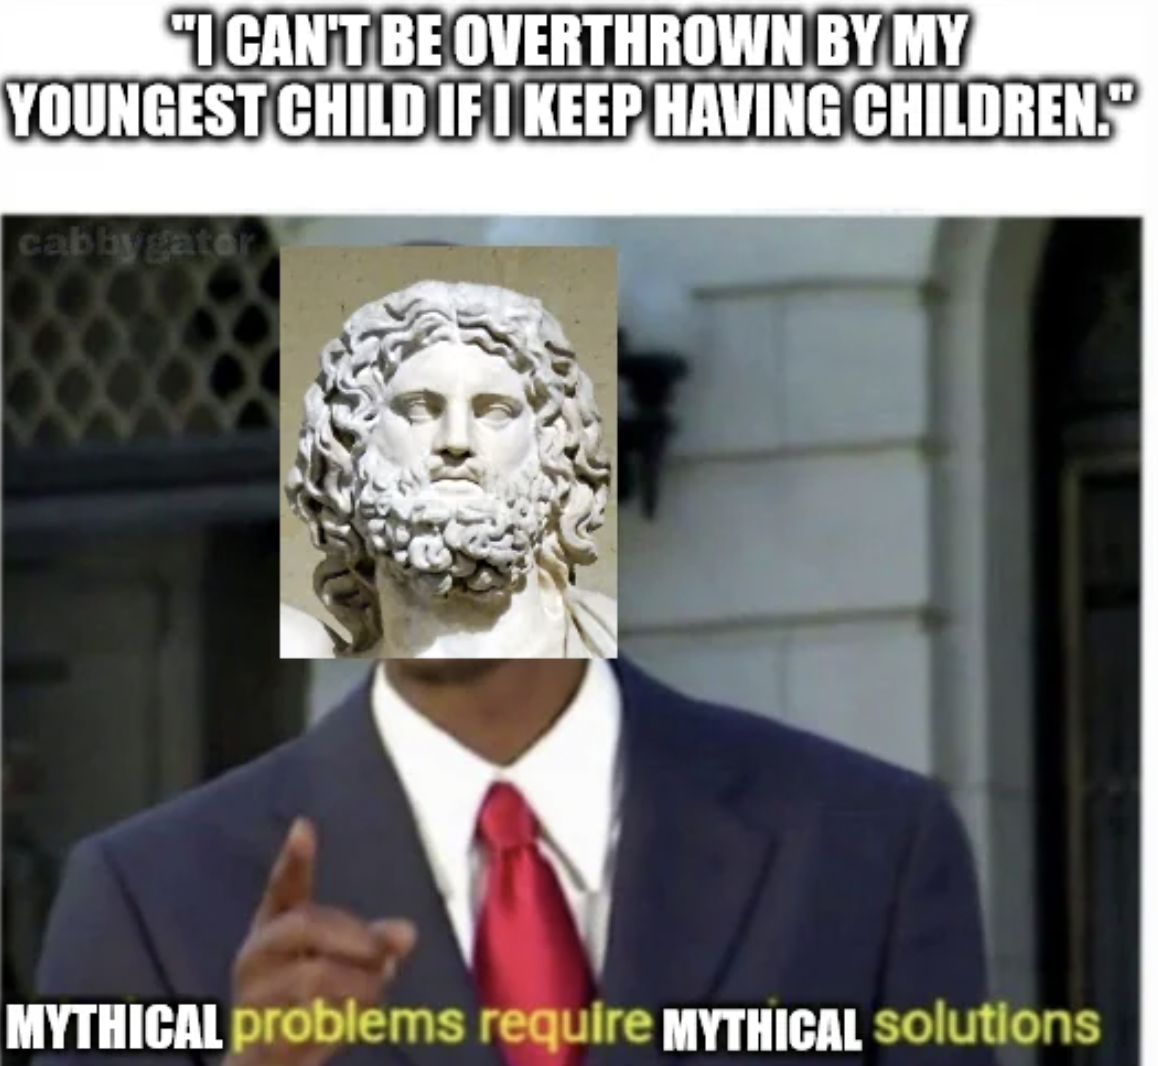 head - I Can'T Be Overthrown By My Youngest Child Ifo Keep Having Children. cabbygator Mythical problems require Mythical solutions